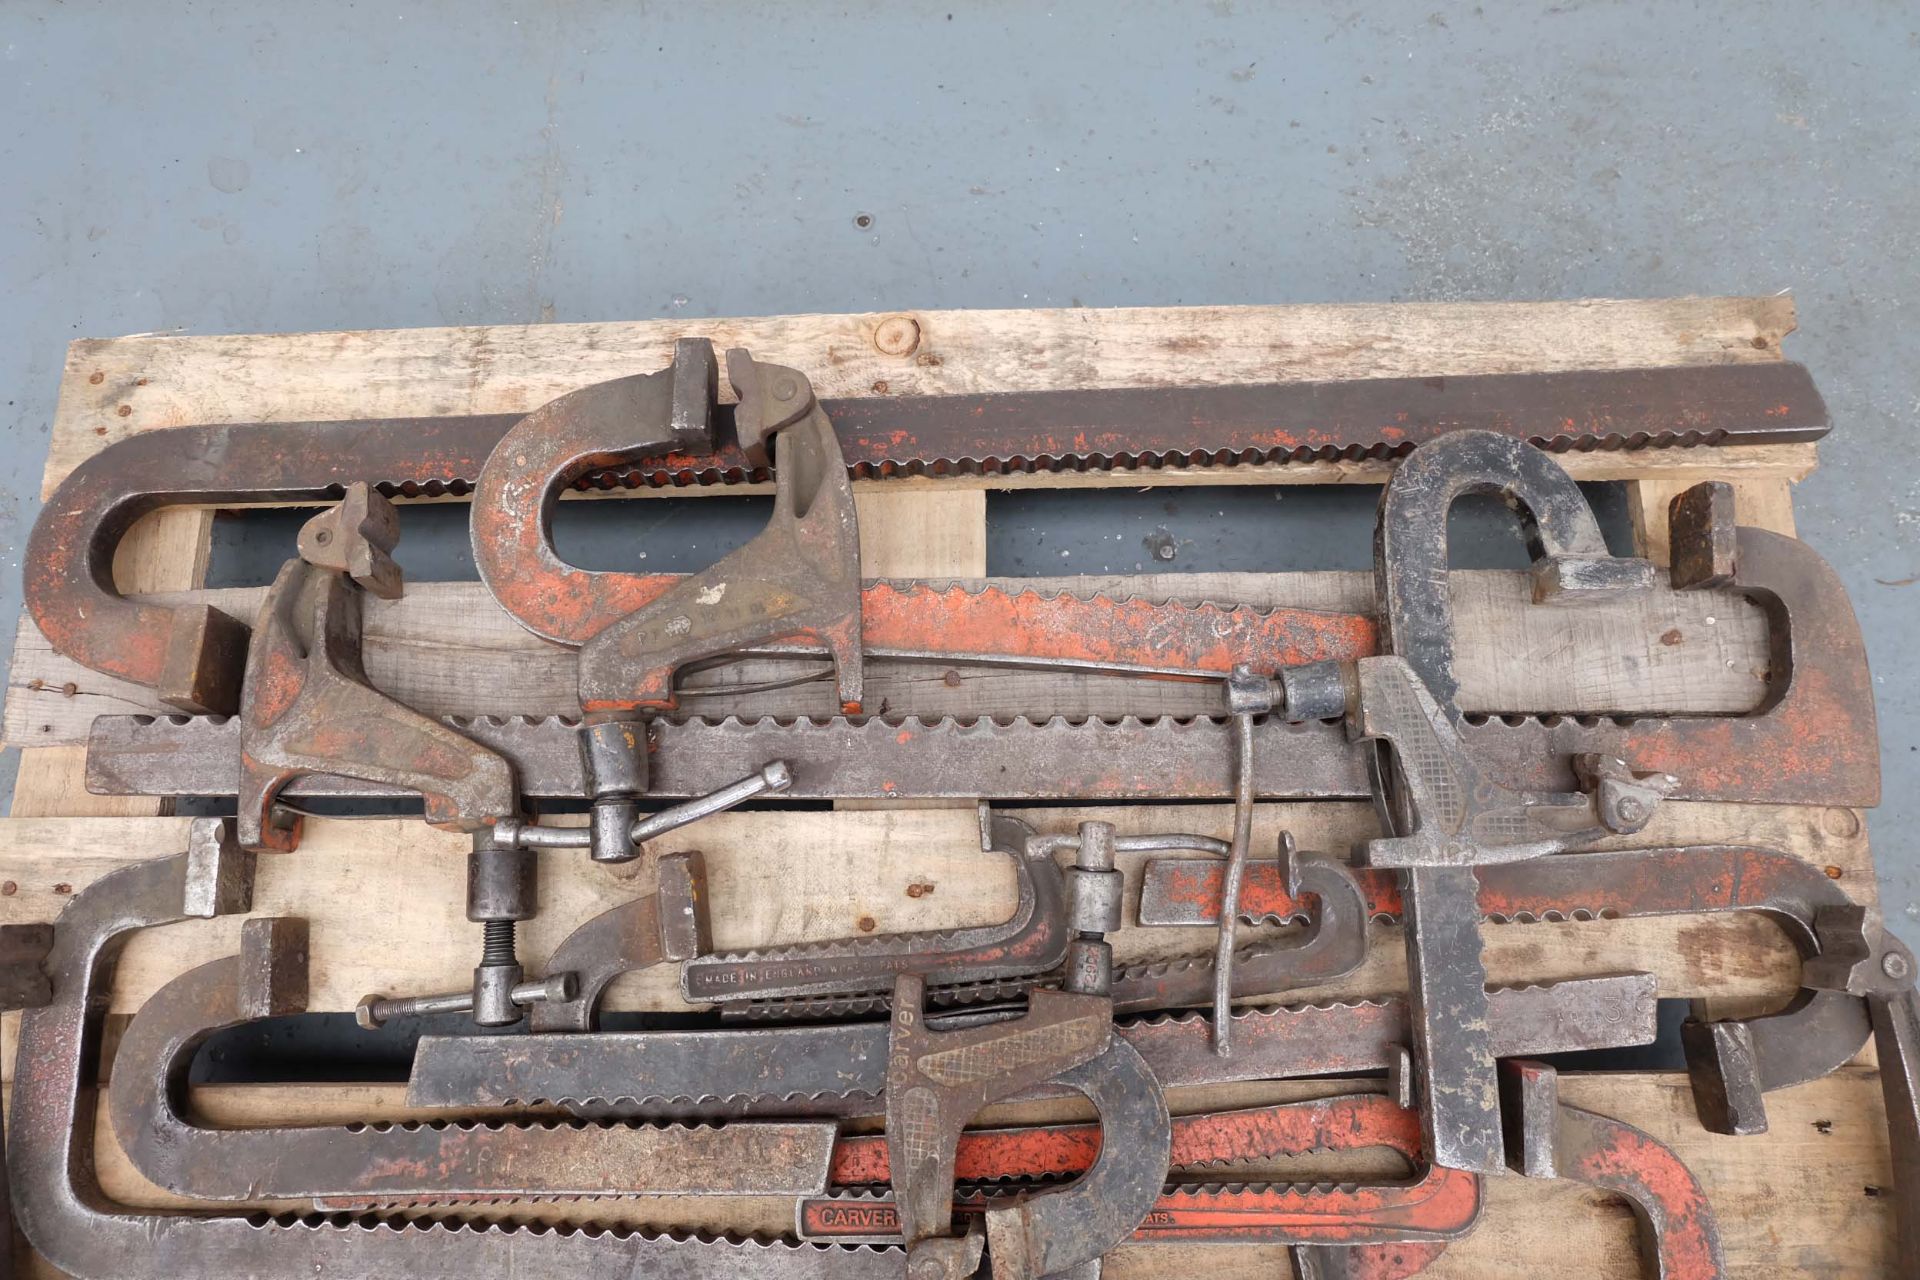 Quantity of Carver Clamps and parts of Carver Clamps. - Image 4 of 6